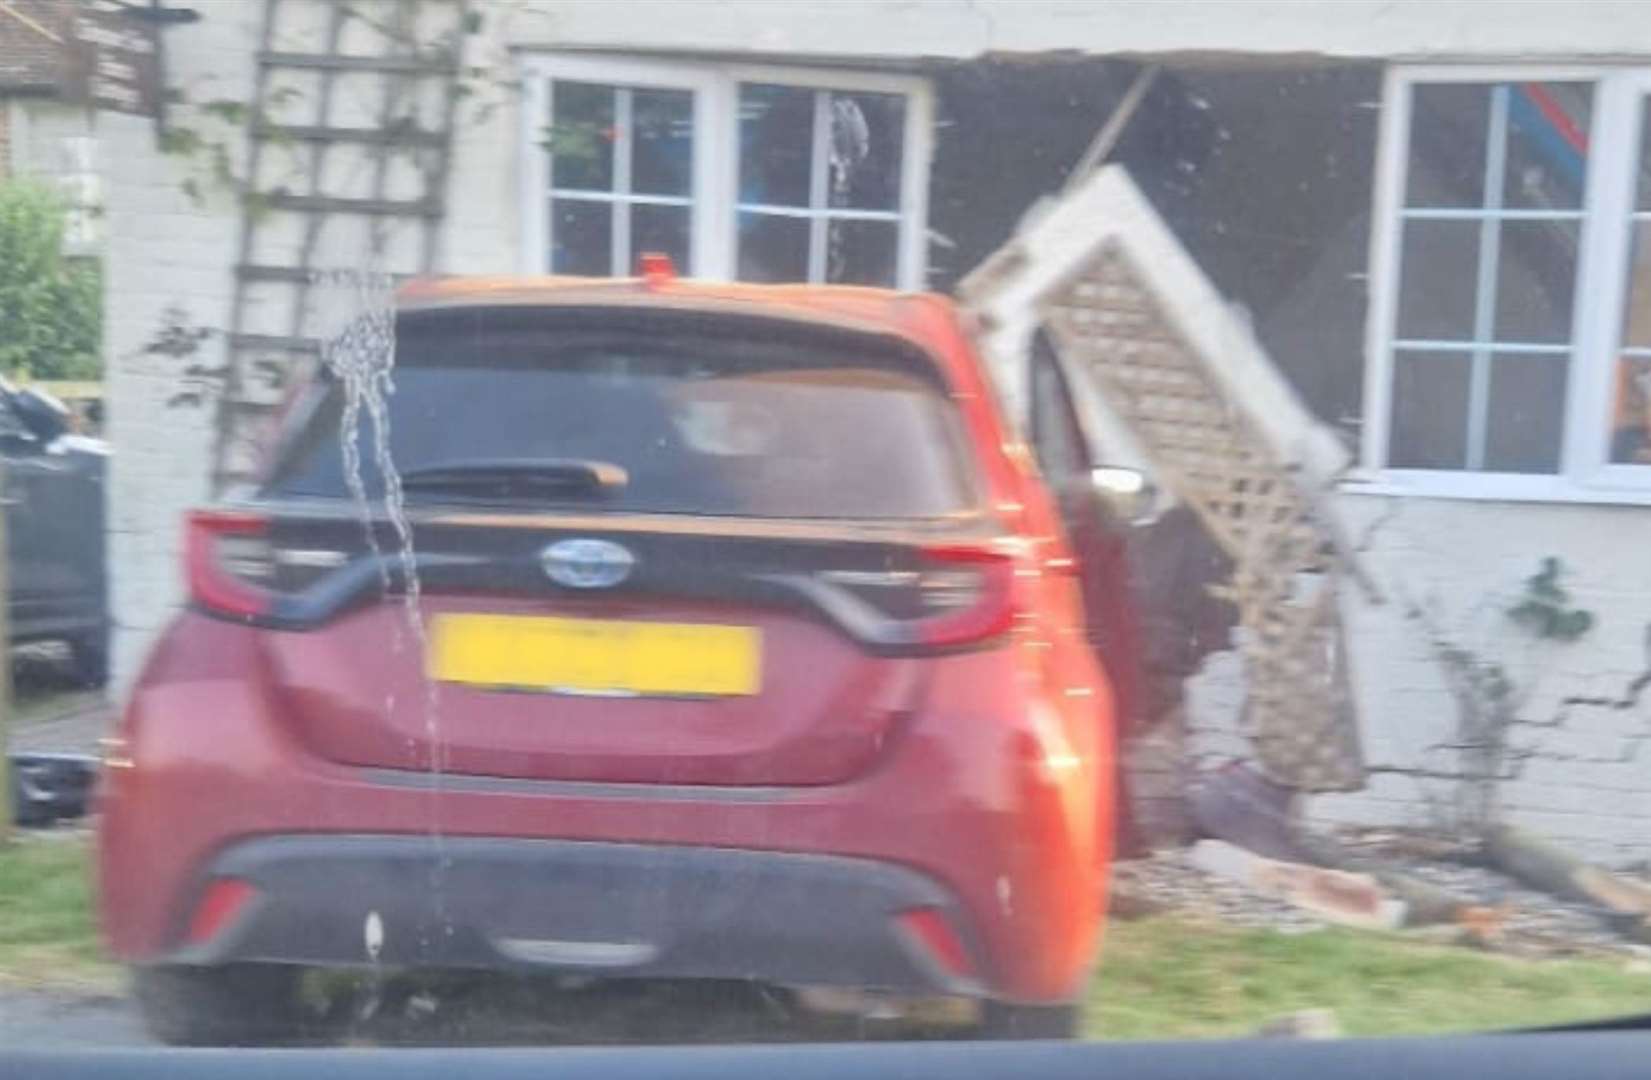 A car ploughed into a house in Chequer Tree Farm Road, Mersham, on Wednesday afternoon